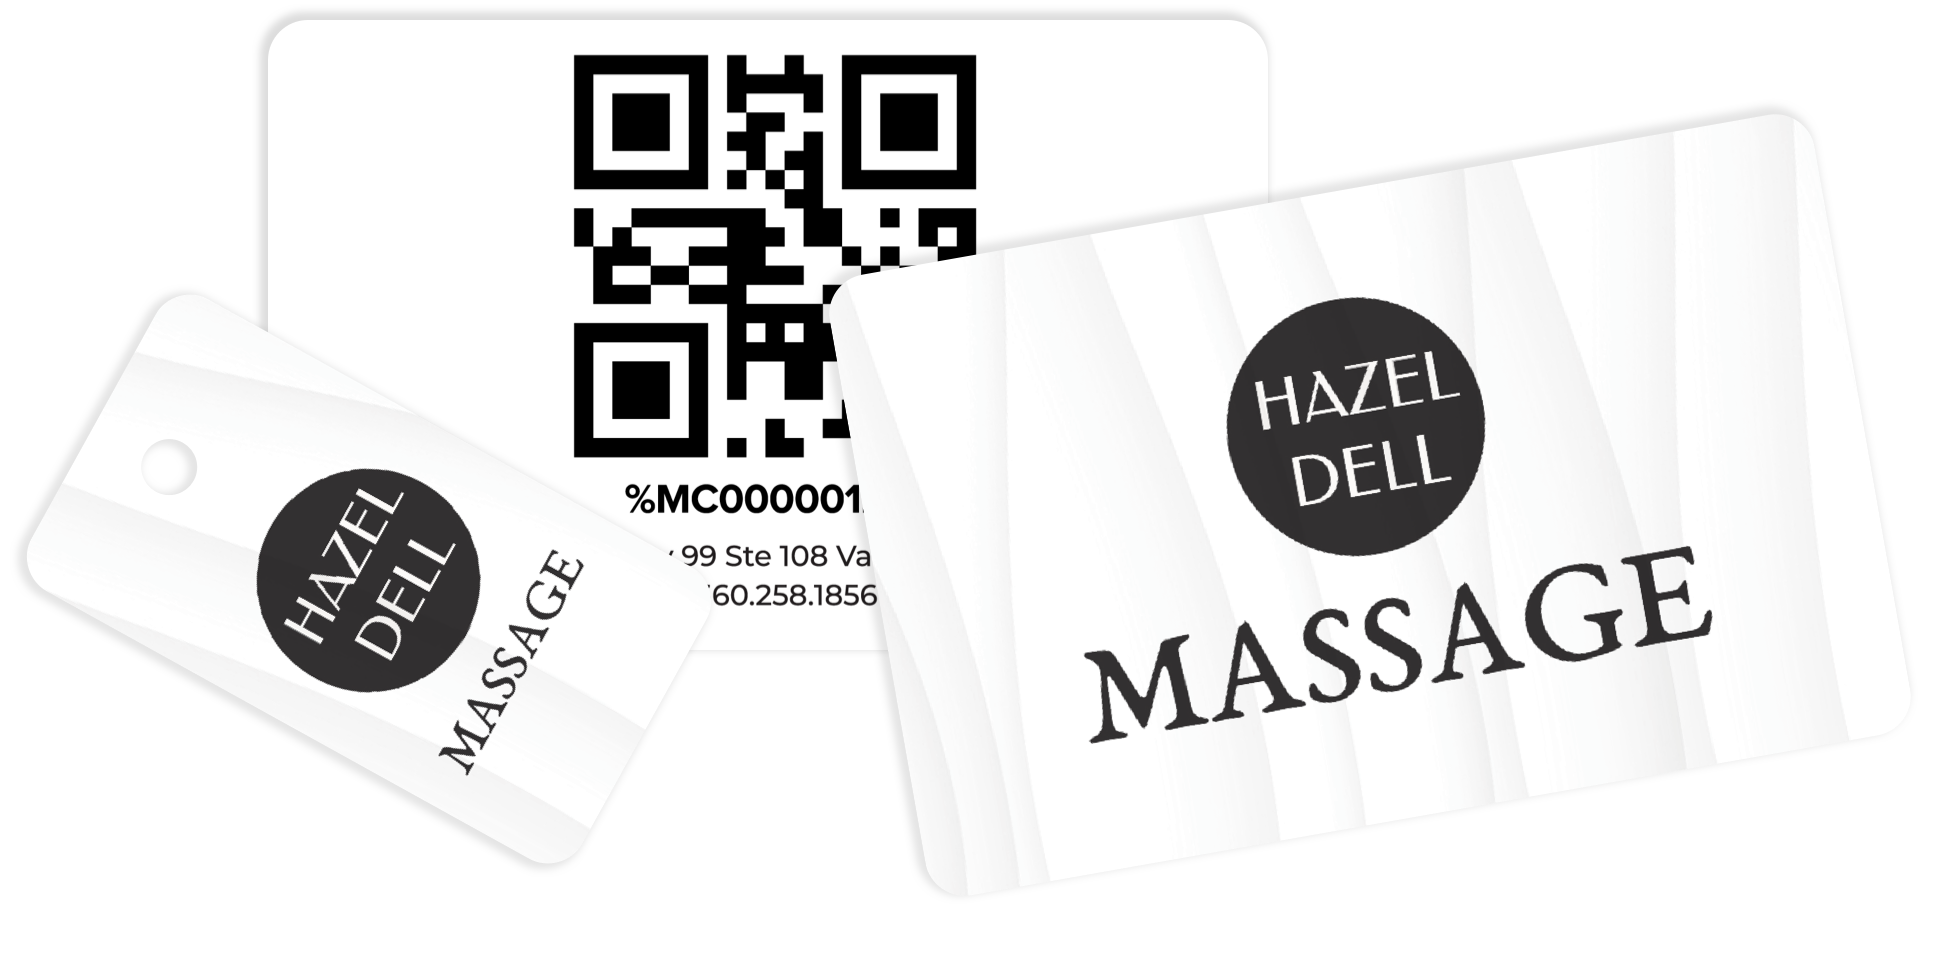 Hazel_Dell_Massage_and_Chiropractic.png